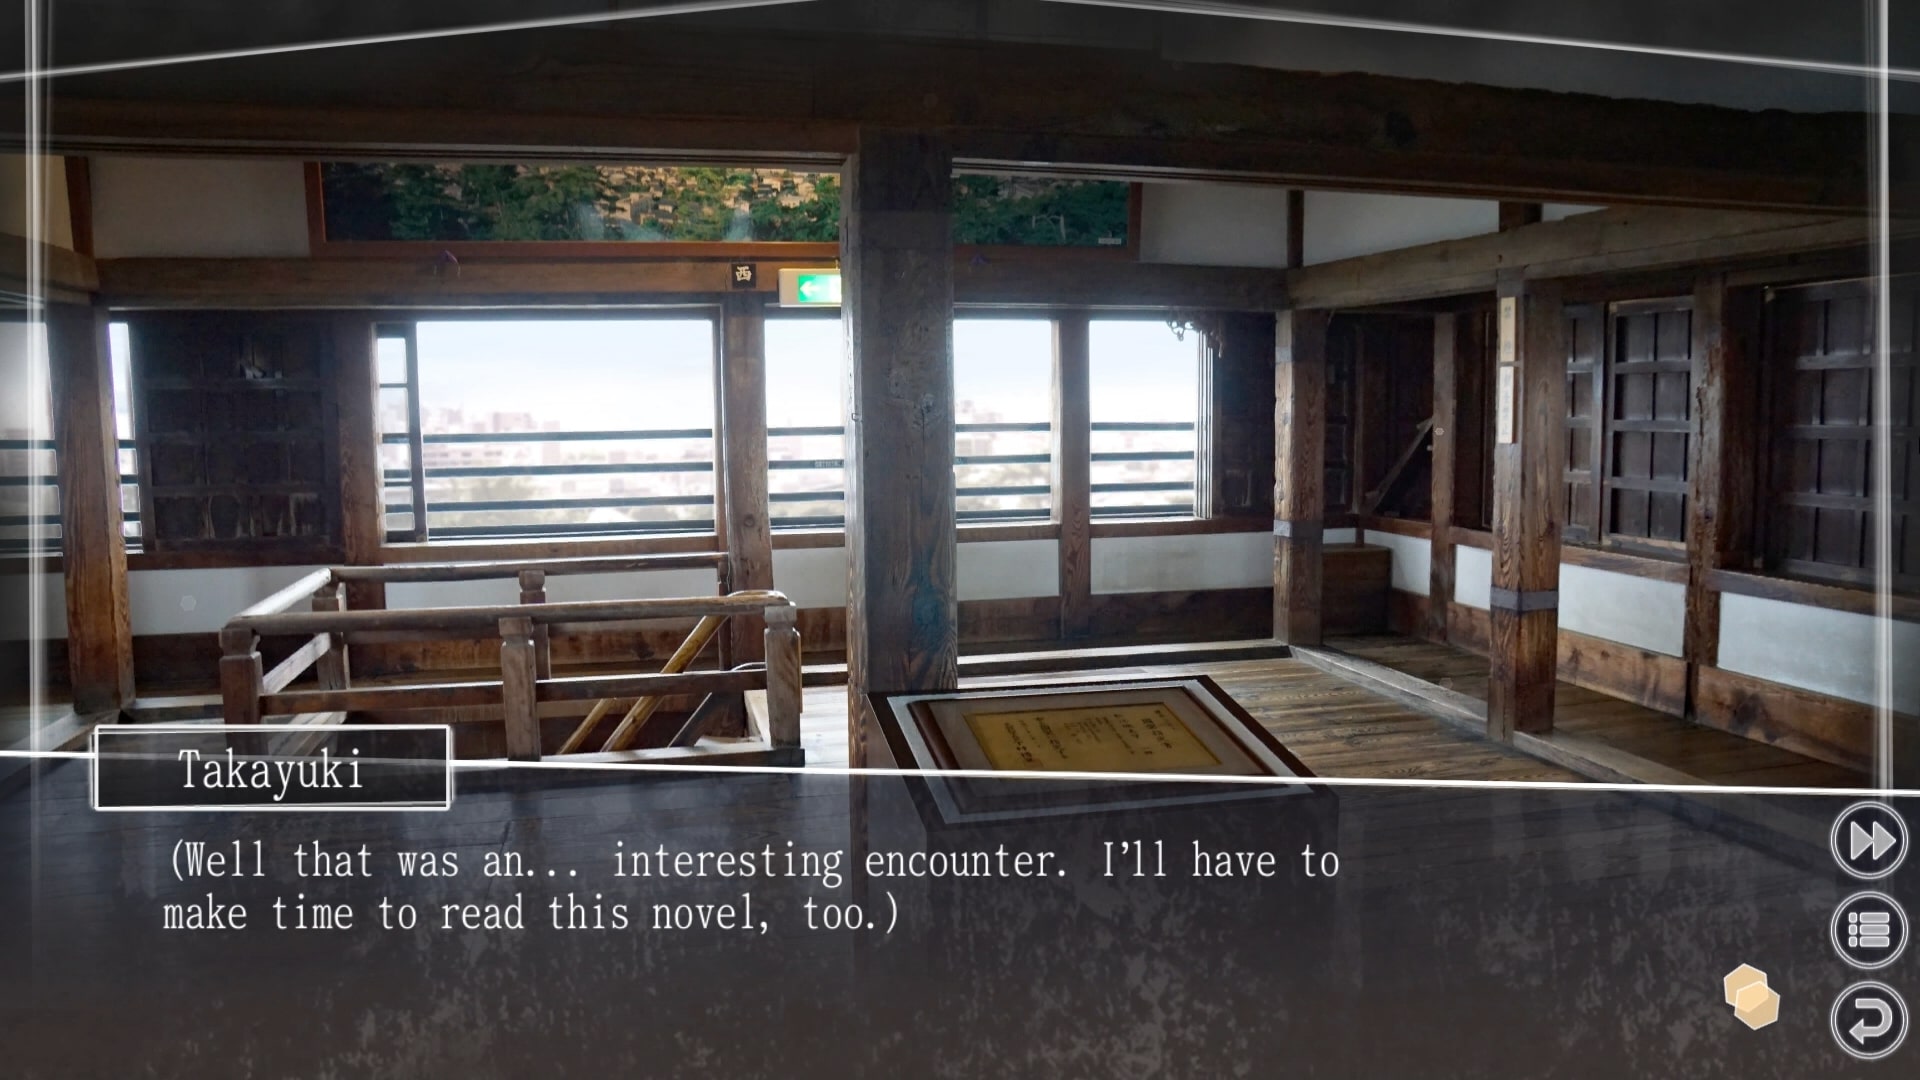 Root Letter Last Answer - Additional Scenarios for Root Letter Last Answer - Scenario 1: Wandering Traveler - FBED755